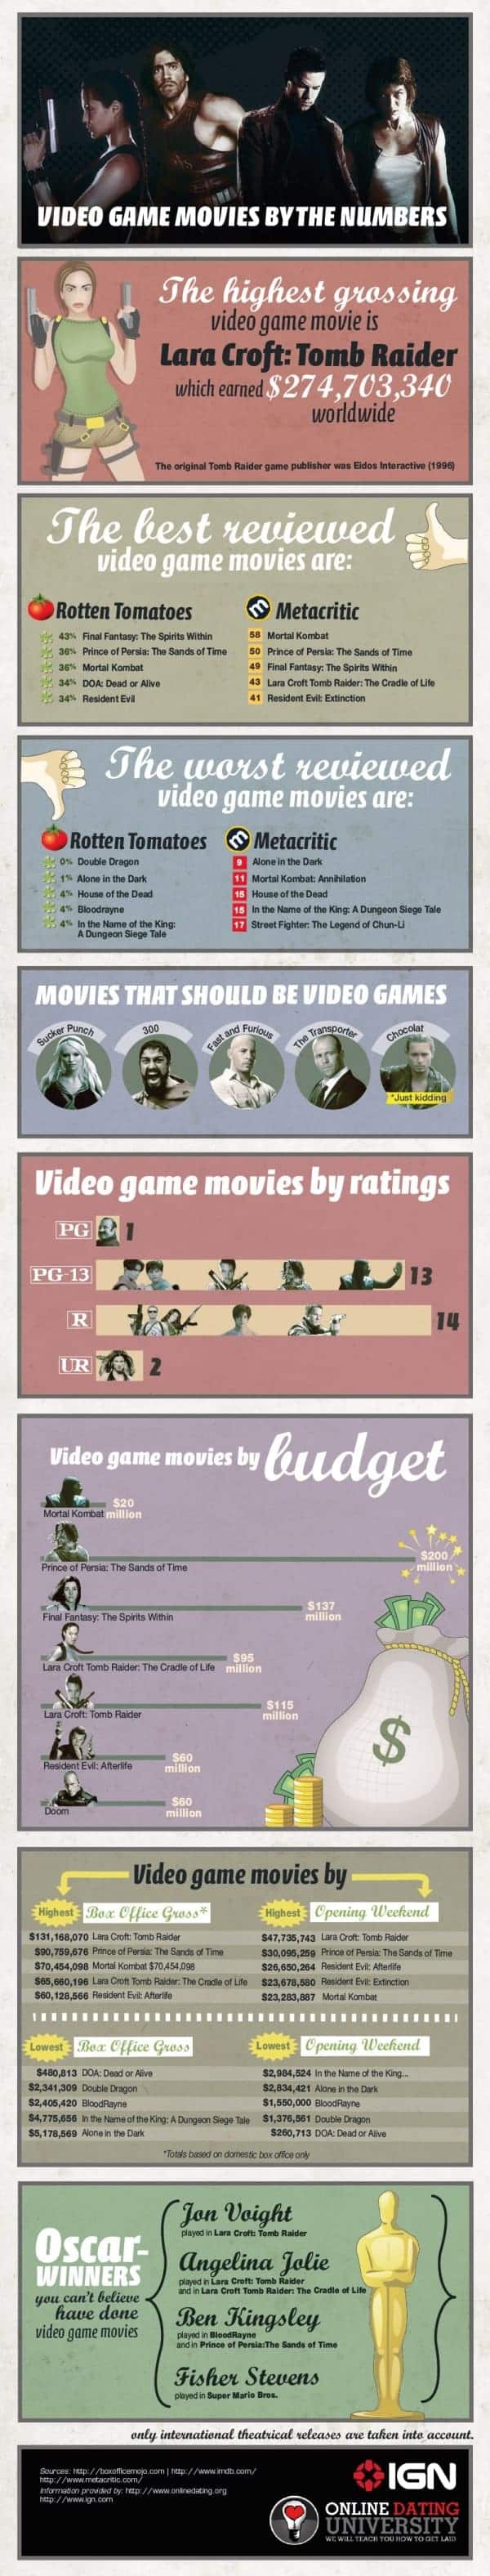 Video Game Movies By The Numbers